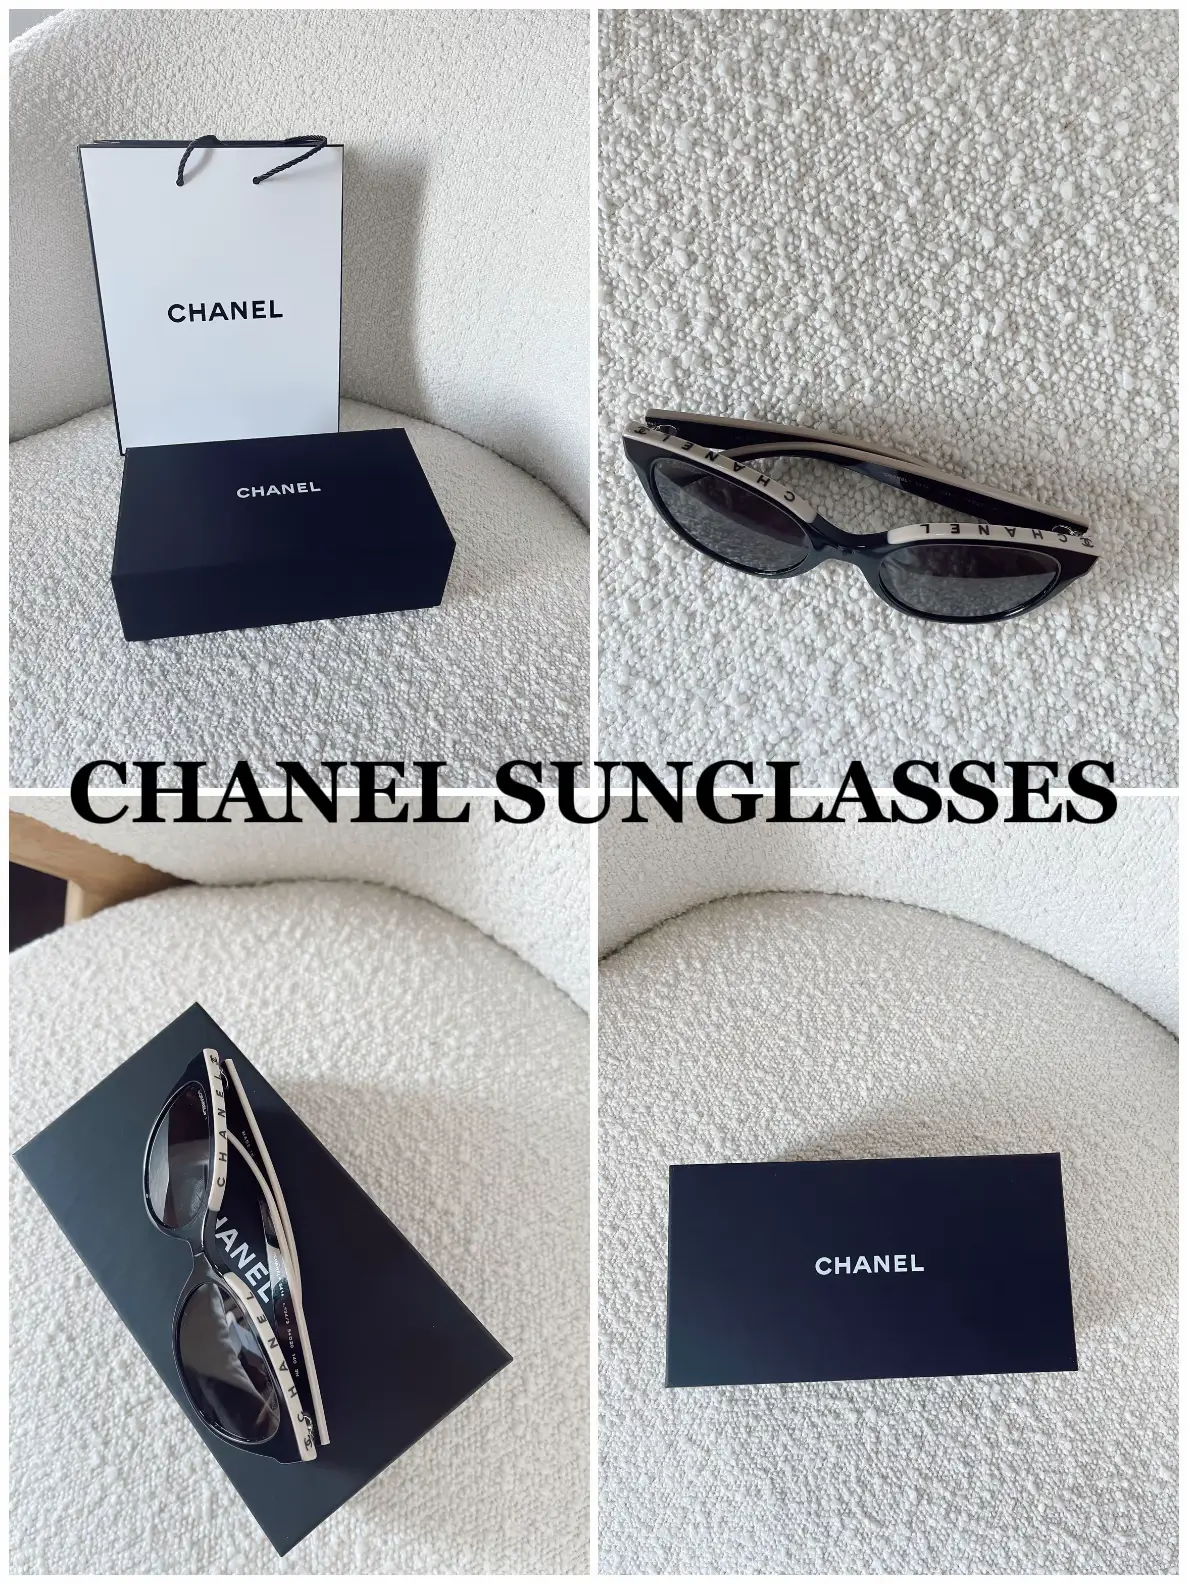 New In Stores Now CHANEL 5414 Butterfly Acetate Black Beige